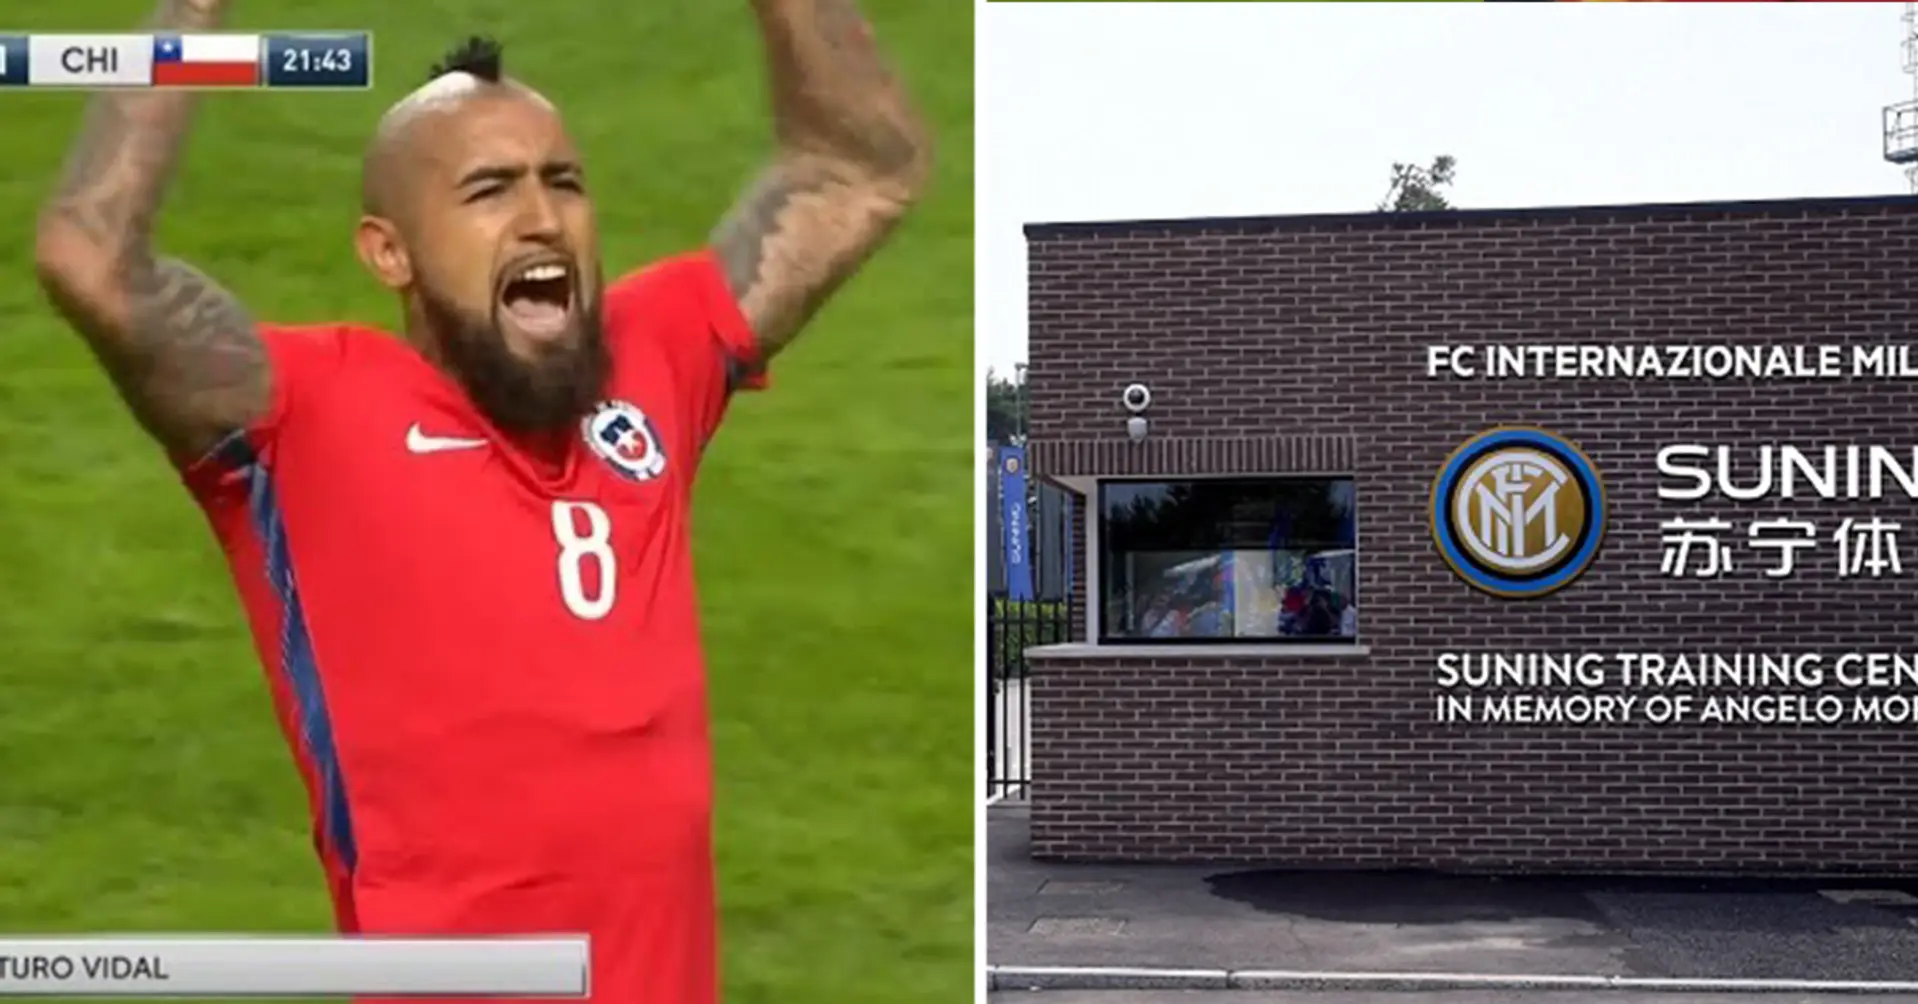 Arturo Vidal surprises fans with his unusual new car spotted at Inter’s training ground